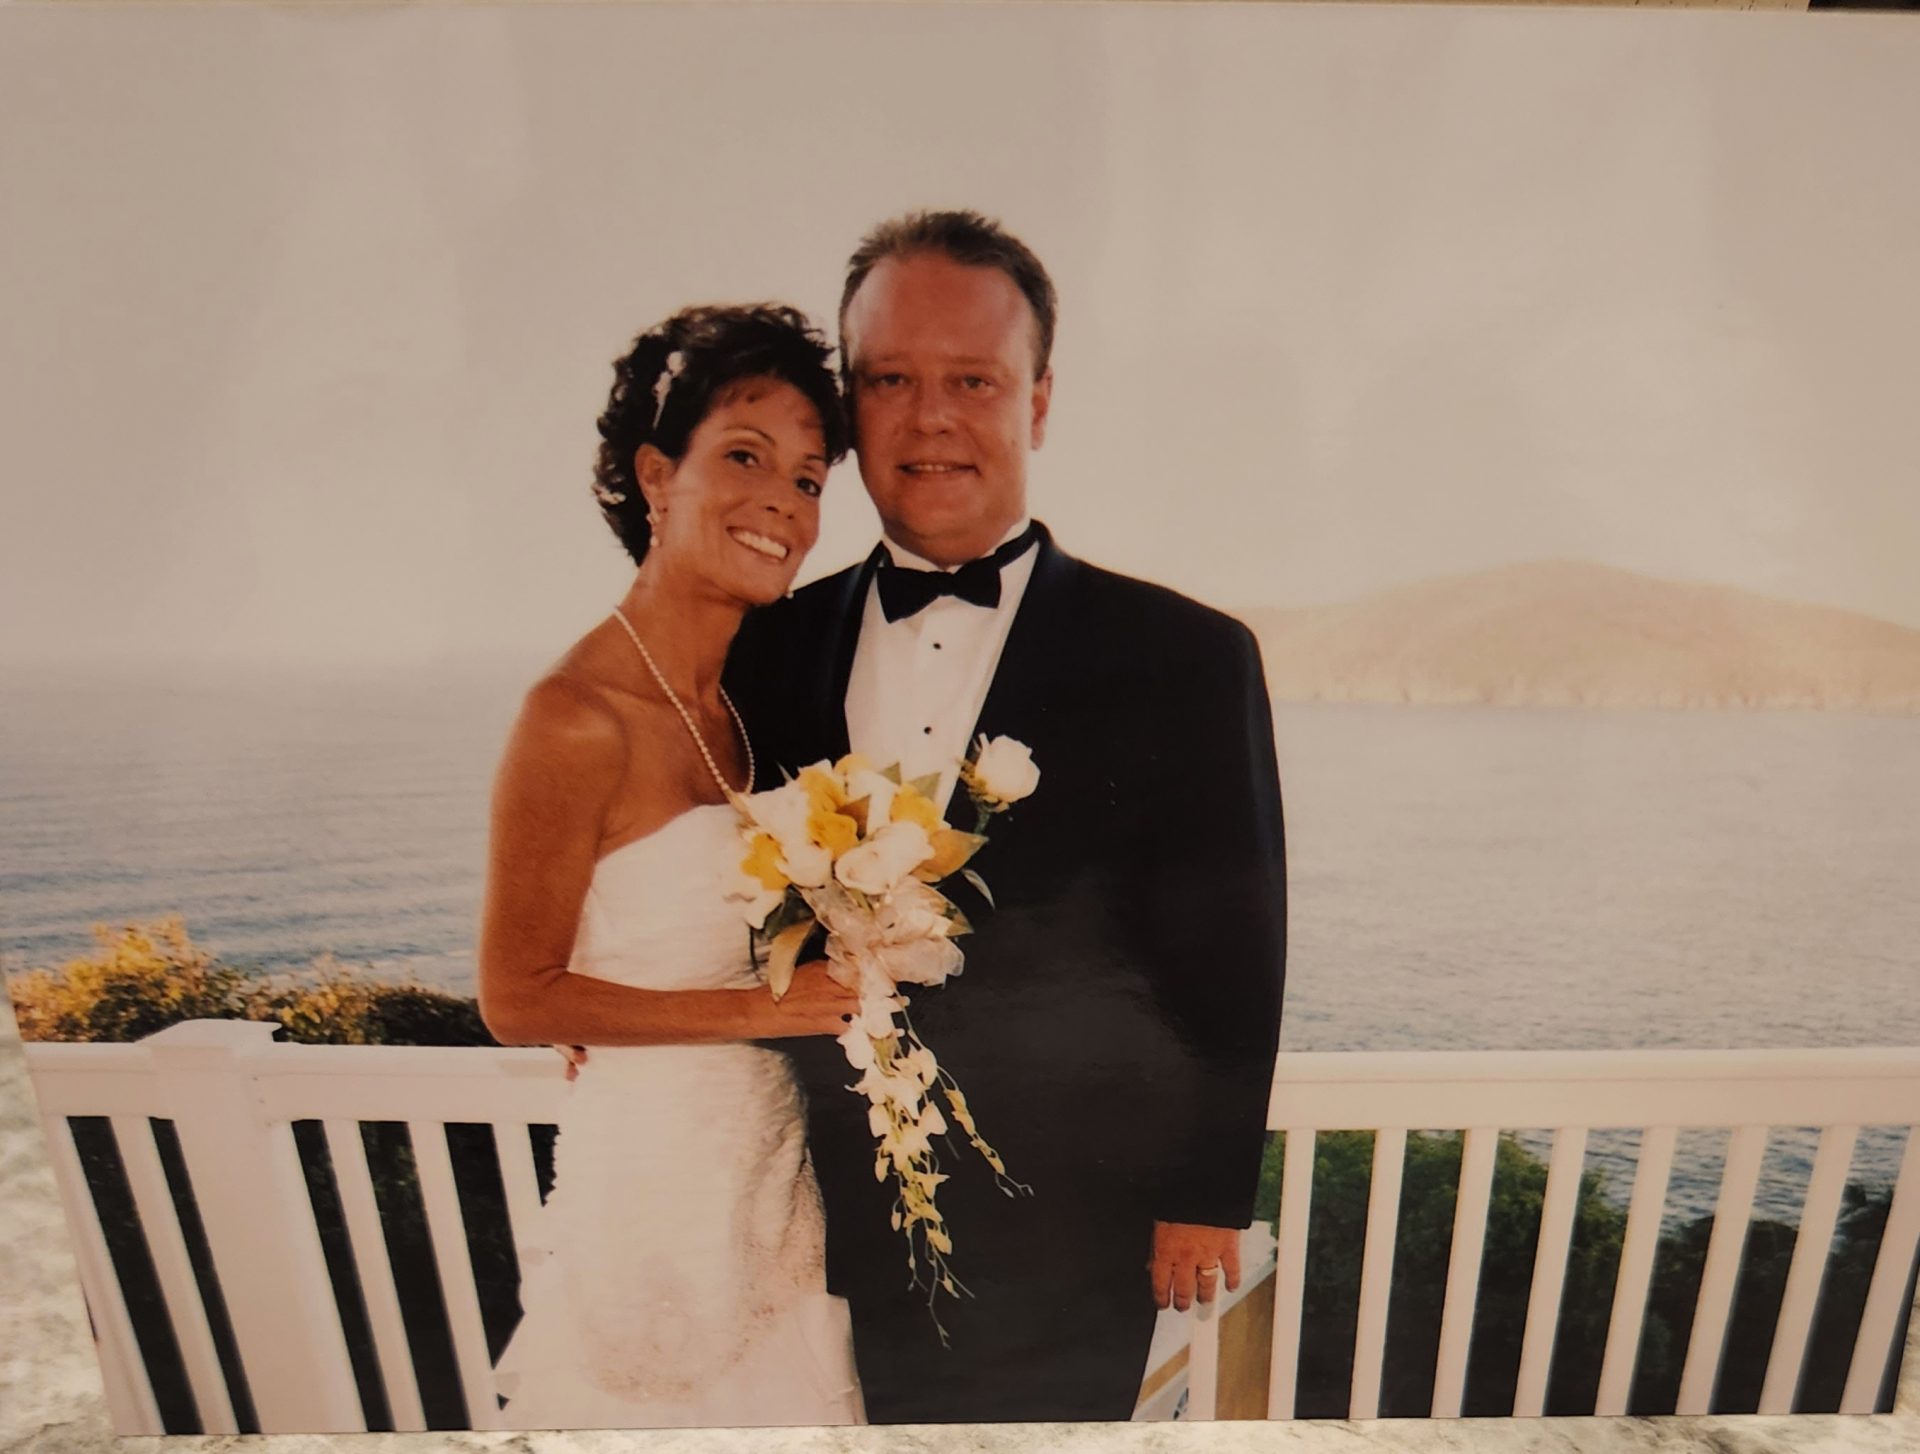 Our wedding day in St.Thomas 2006